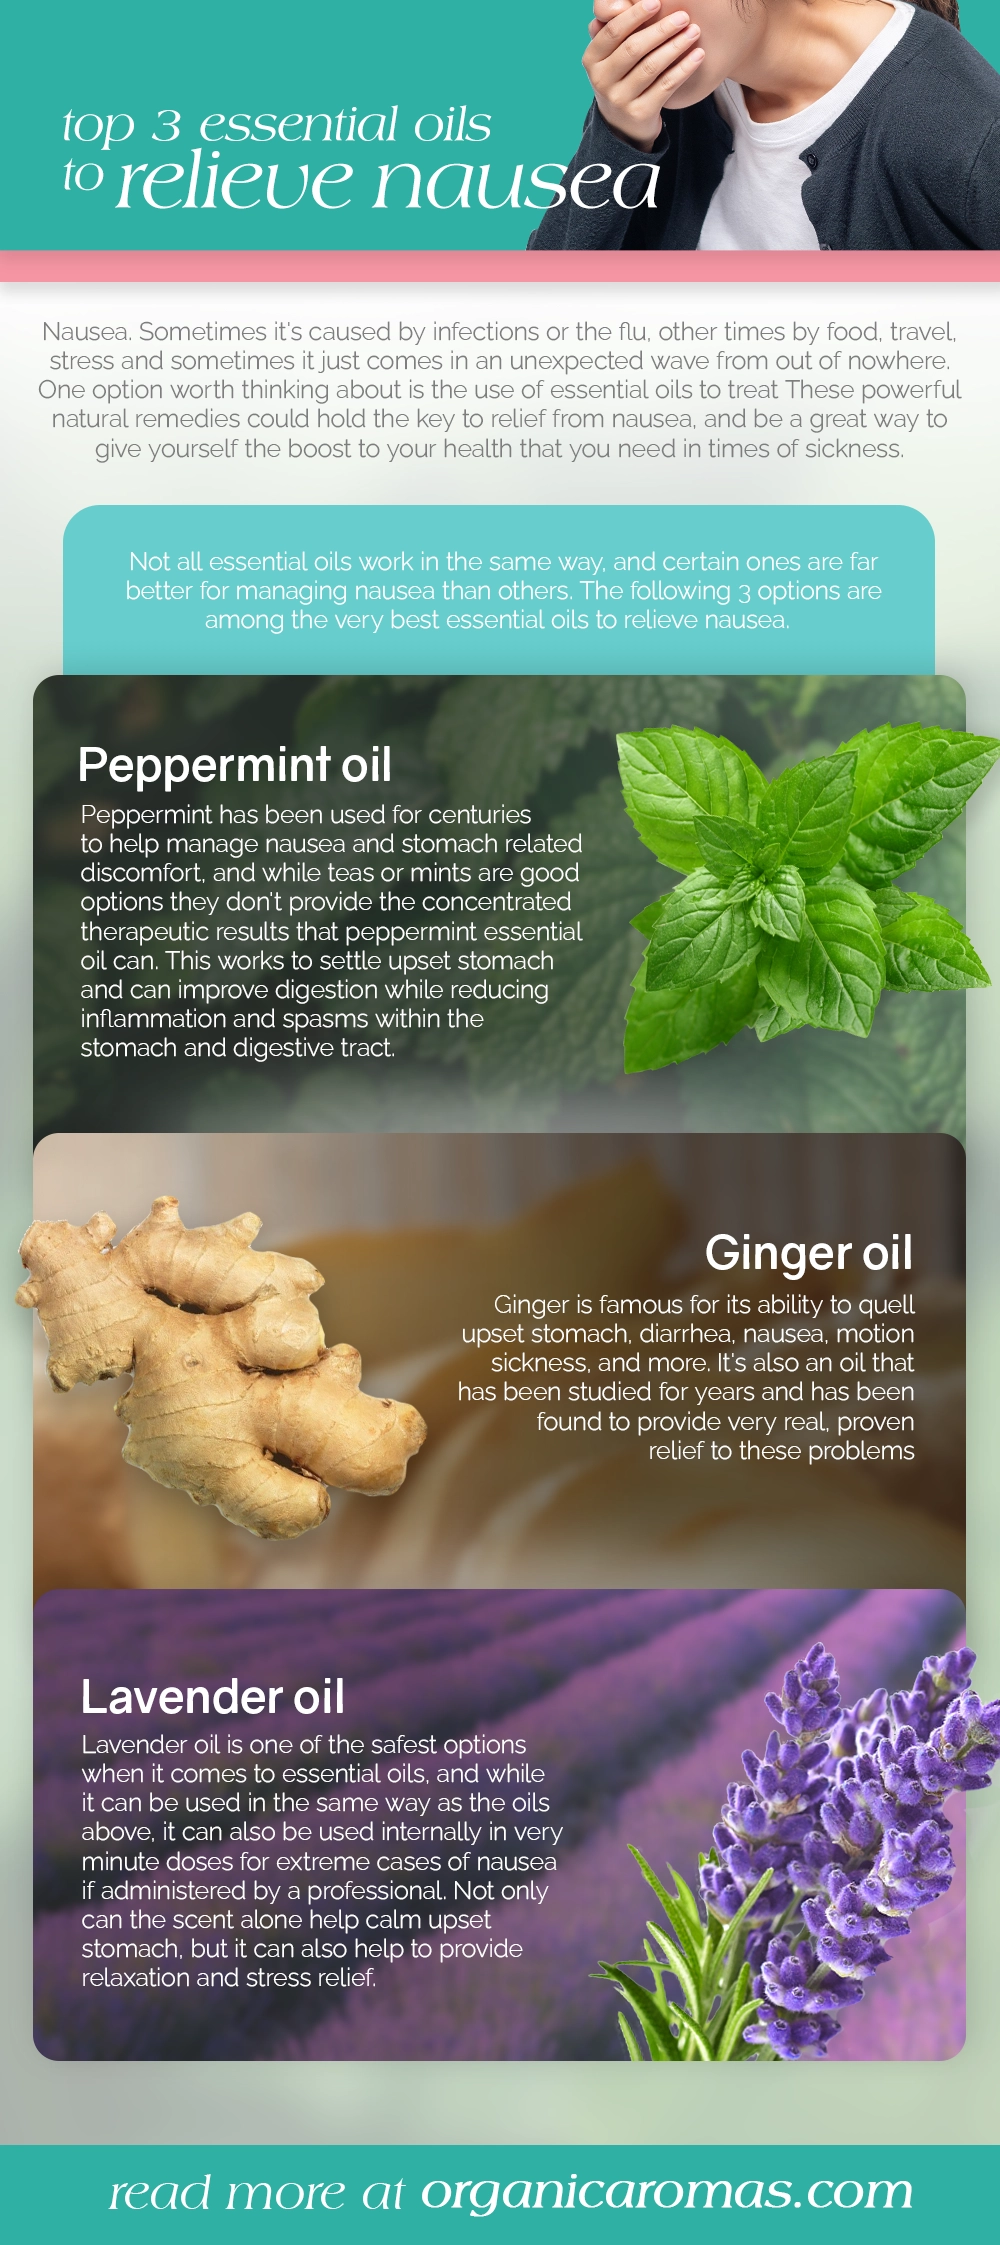 Peppermint oil for nausea